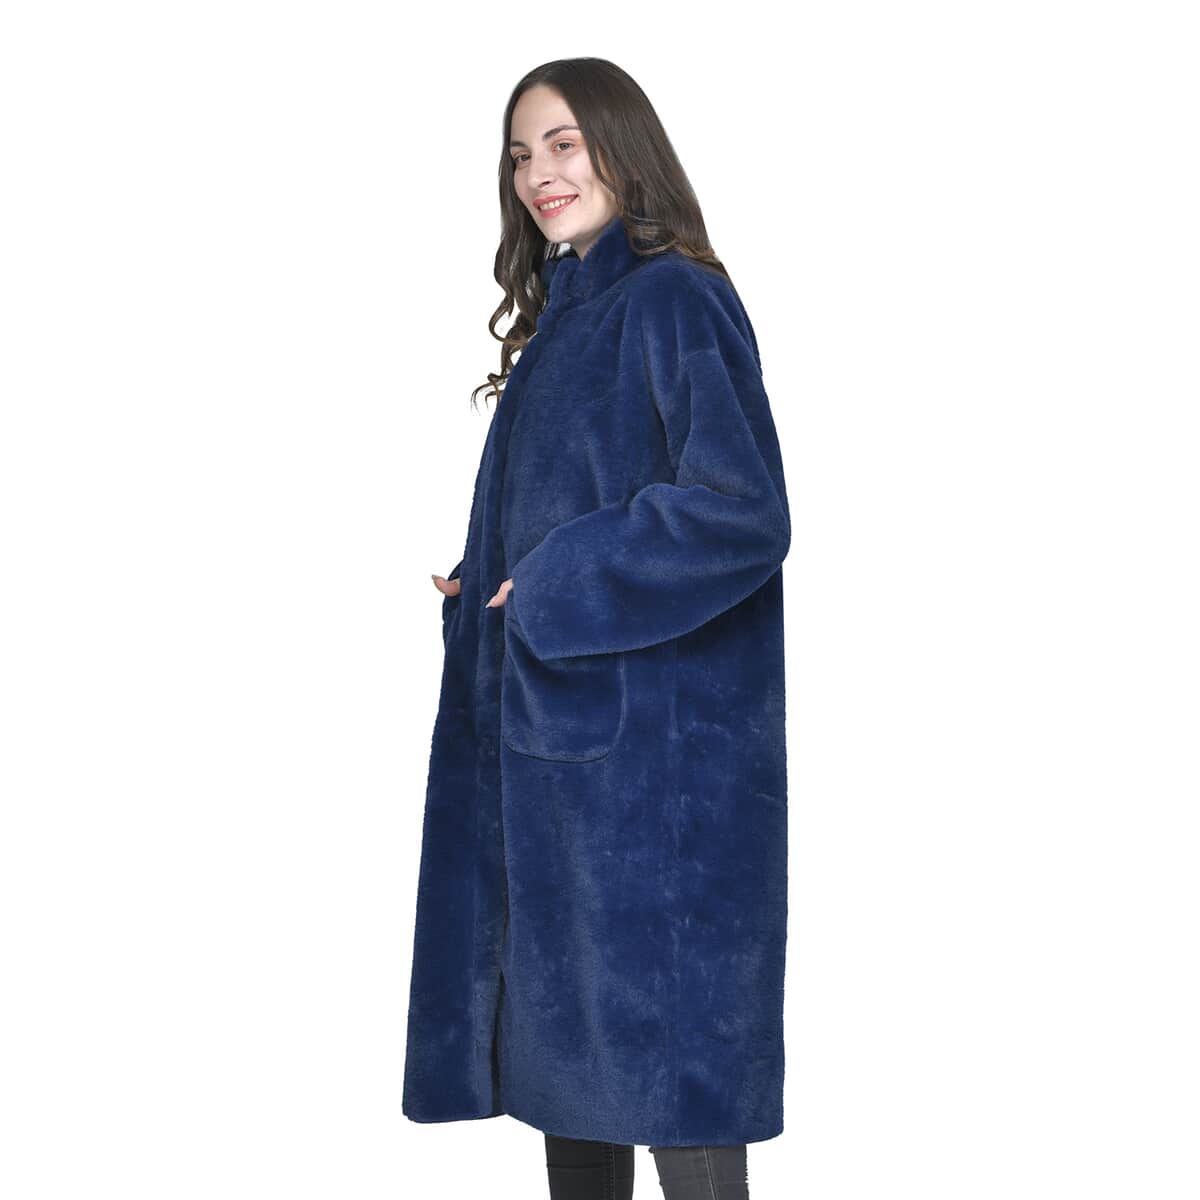 Tamsy Blue Suede and Polyester Faux Fur Long Coat For Ladies, Ultra-Soft Quick Drying Machine Washable Womens Winter Coat- M image number 2